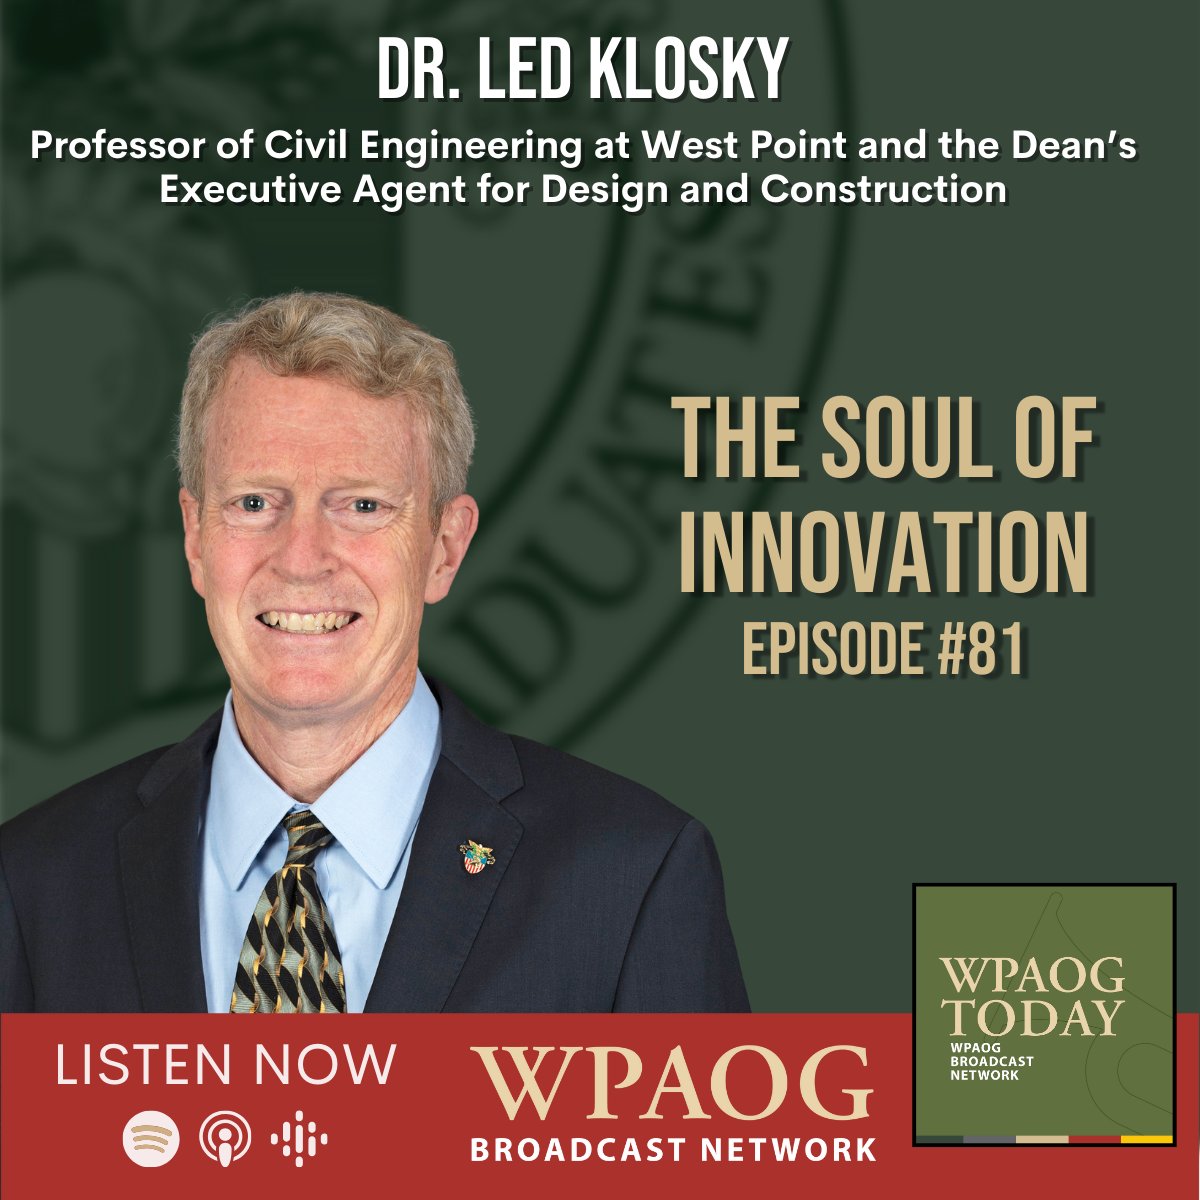 Start your day with our #podcast & #WestPoint Professor of Civil Engineering Dr. Led Klosky who's shaping the #warriors of tomorrow and the high-tech CEAC. Listen now 🎧: bit.ly/4bcFIvn learn more about CEAC 🏫: bit.ly/49POe29. Prepare to be #inspired!